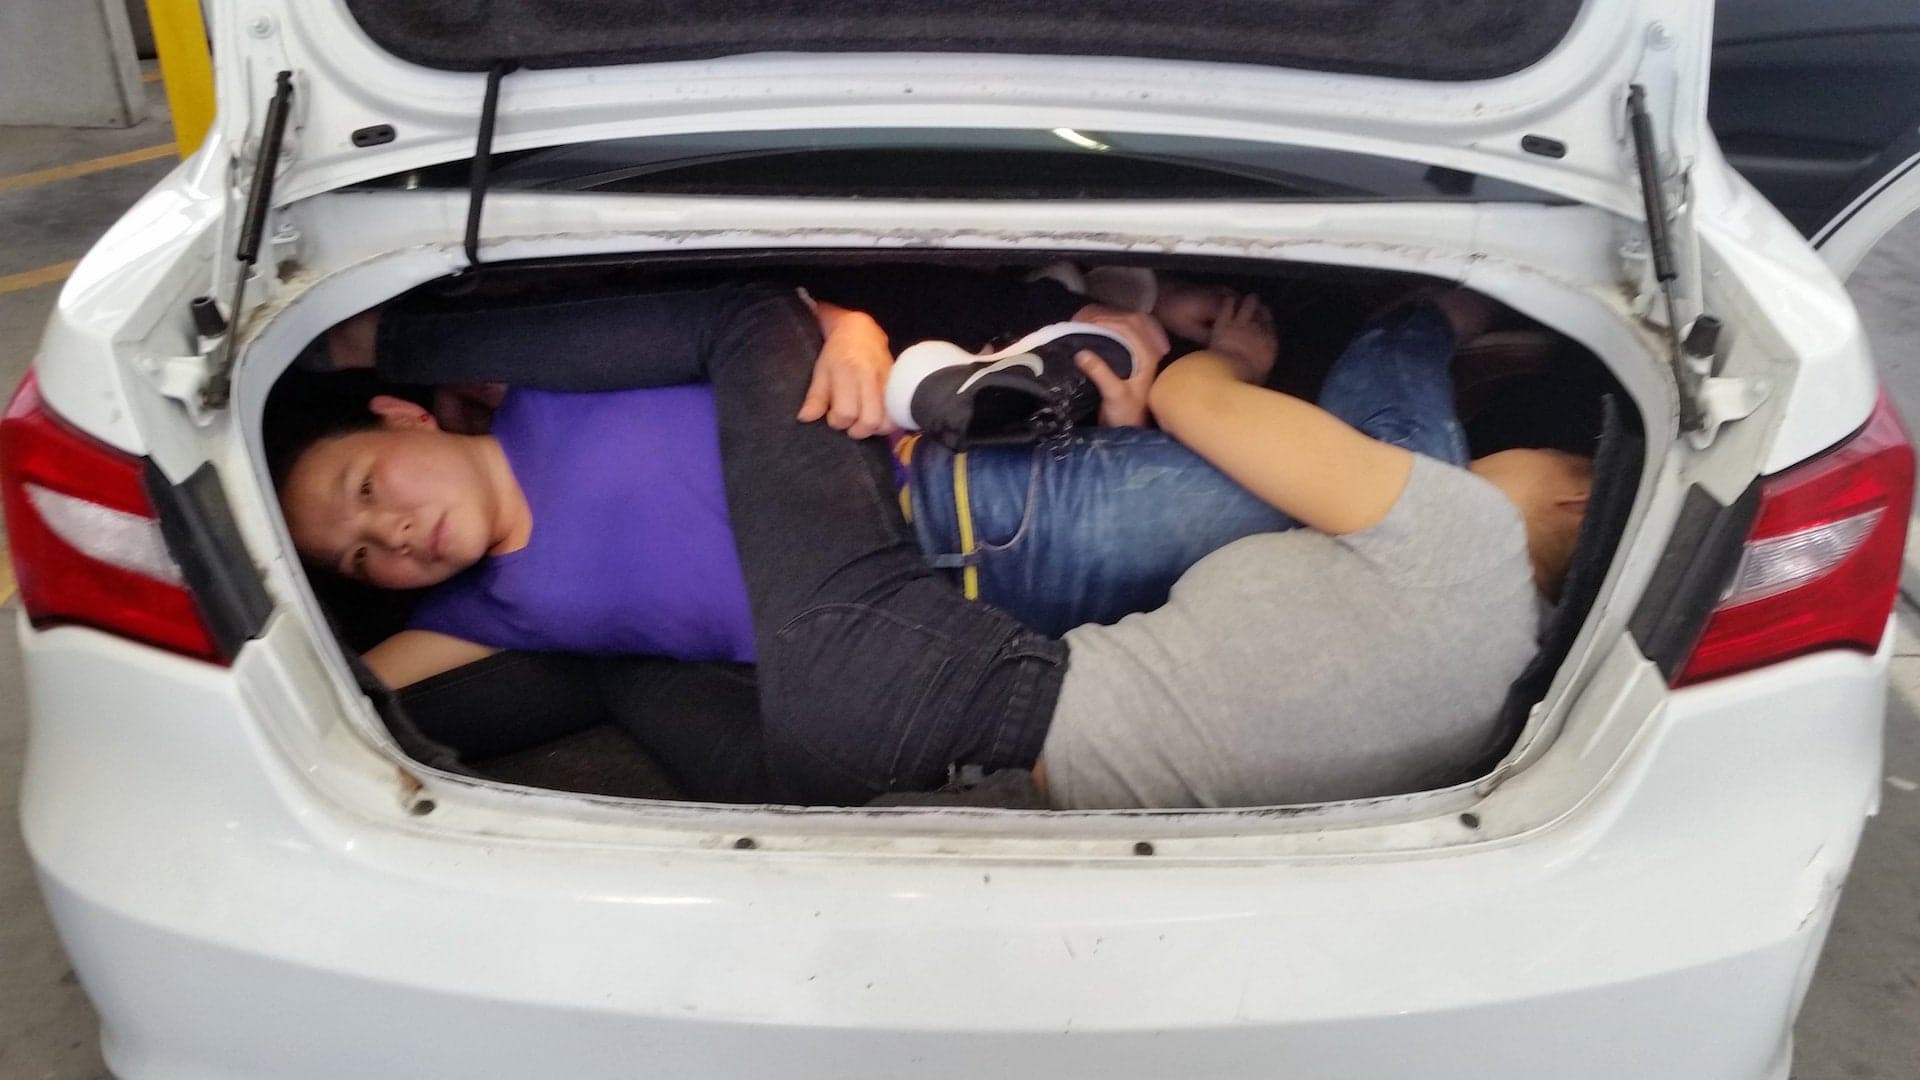 Man Arrested At Border After 4 Undocumented Immigrants Were Found in Car Trunk